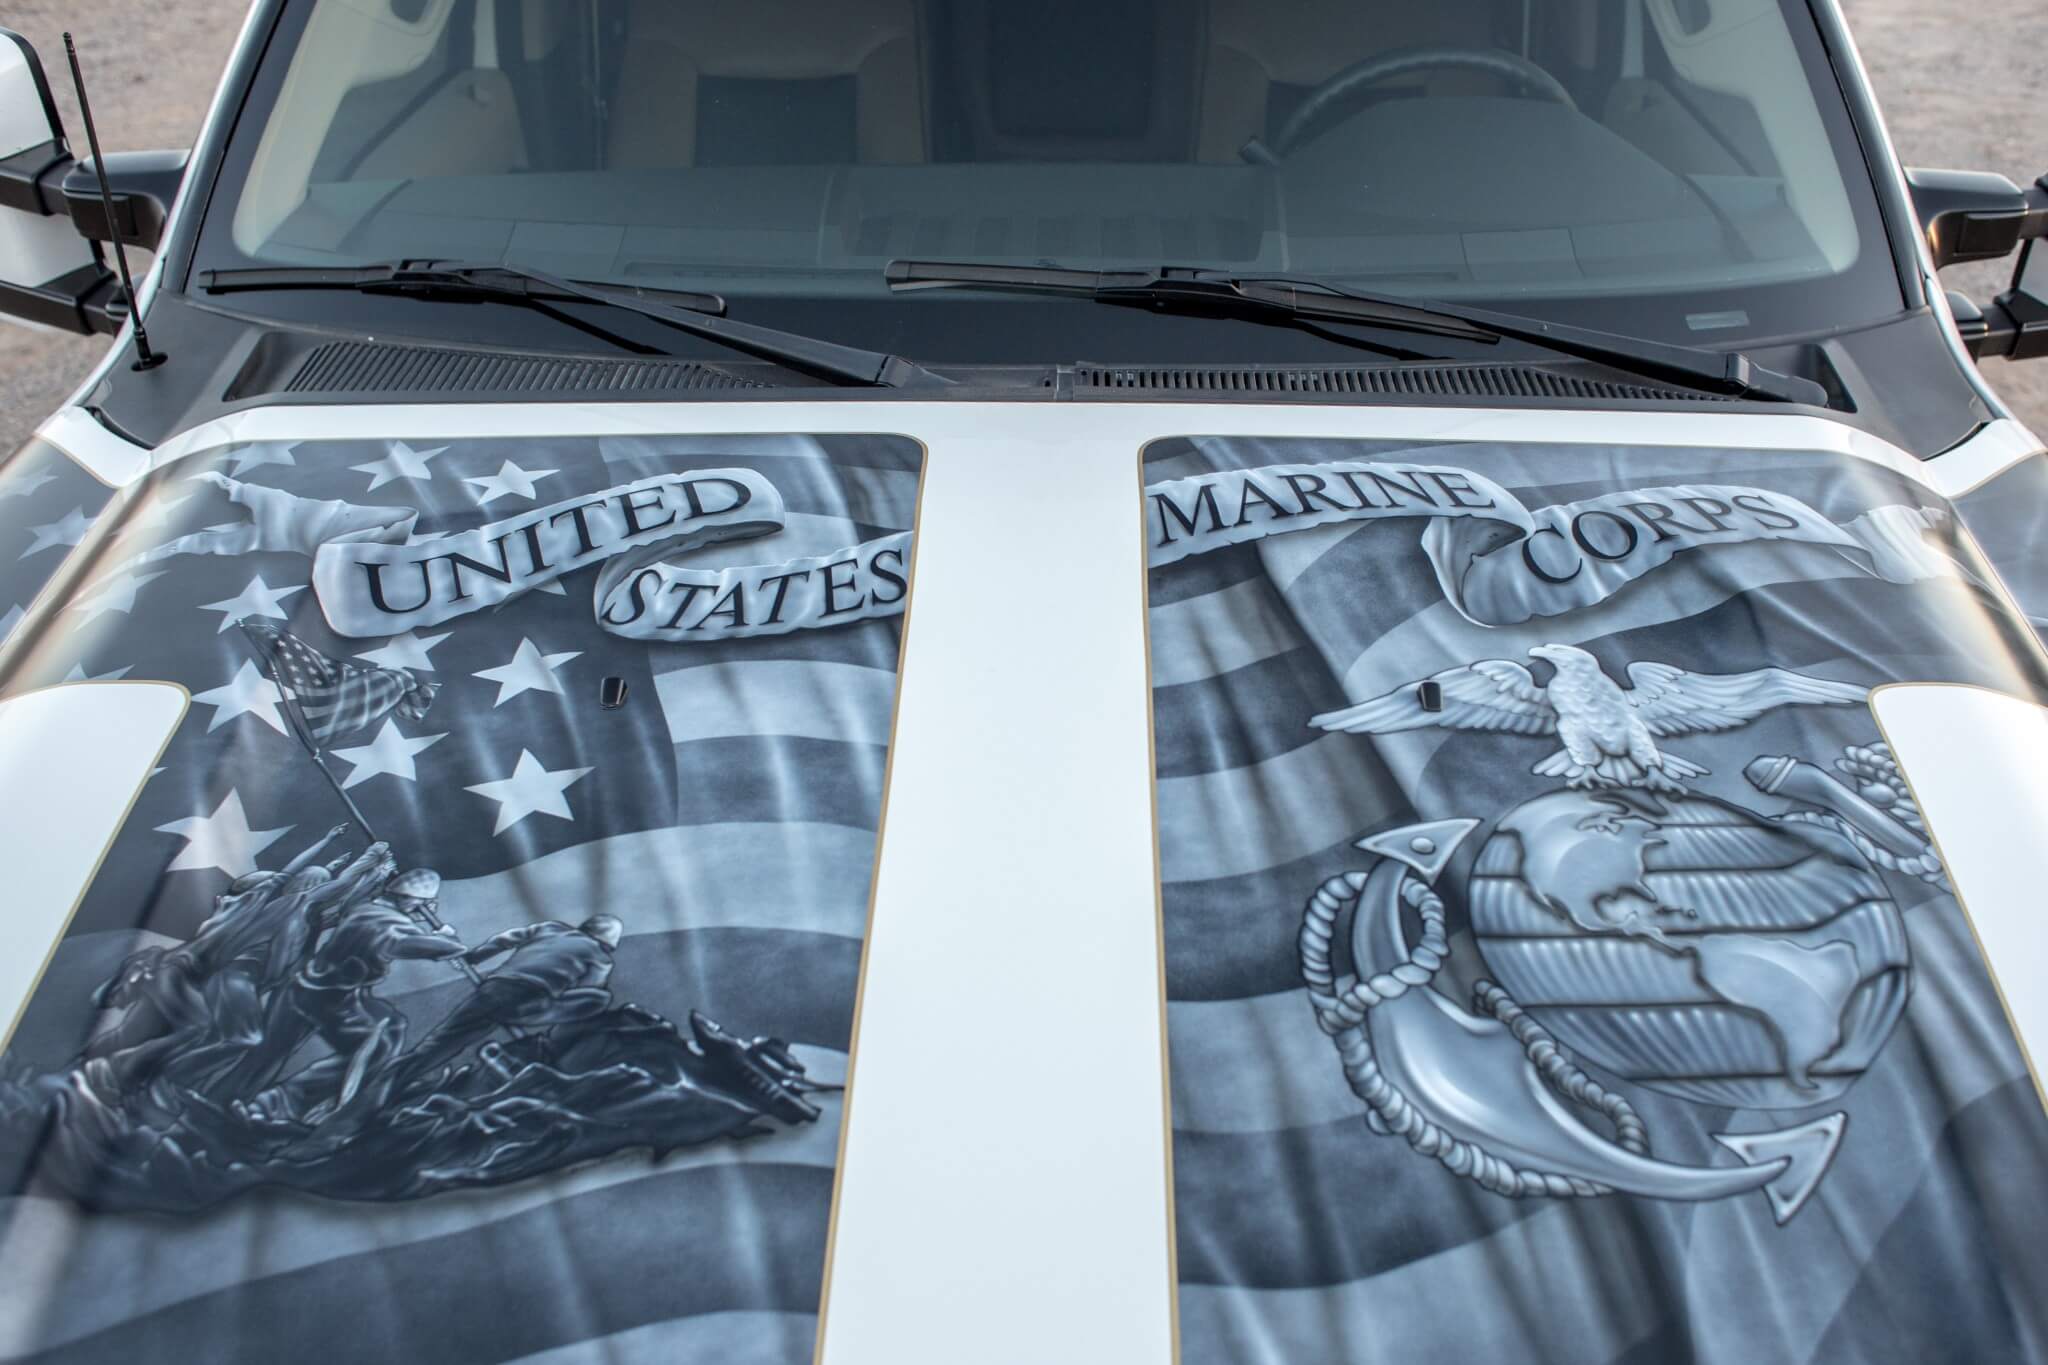 CR Designs helped this truck pay homage to the USMC as the hood features iconic symbols airbrushed over an American flag.